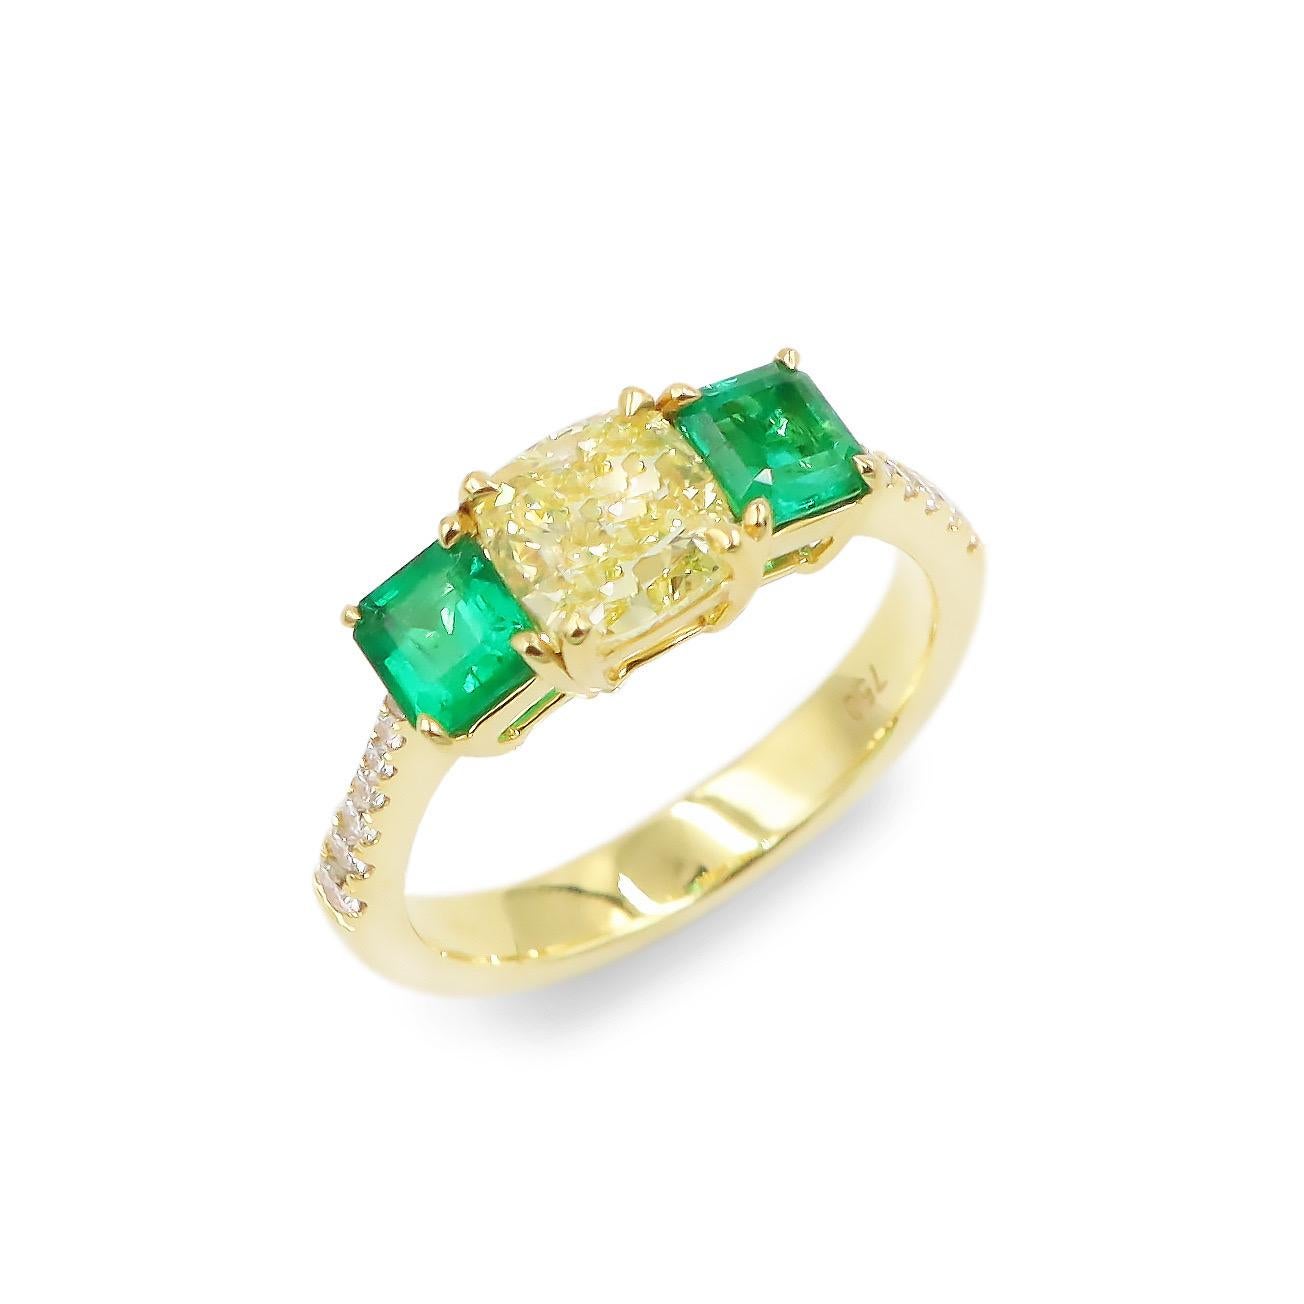 Gia Certified intense yellow 1.50cts
RING 18KT Gold
Diamond Weight: 1.65 carats
Emerald Stone Weight: 0.70ct great clarity super color 
Please inquire for additional details. All pieces are hand made in the Emilio Jewelry Atelier. Our brand is